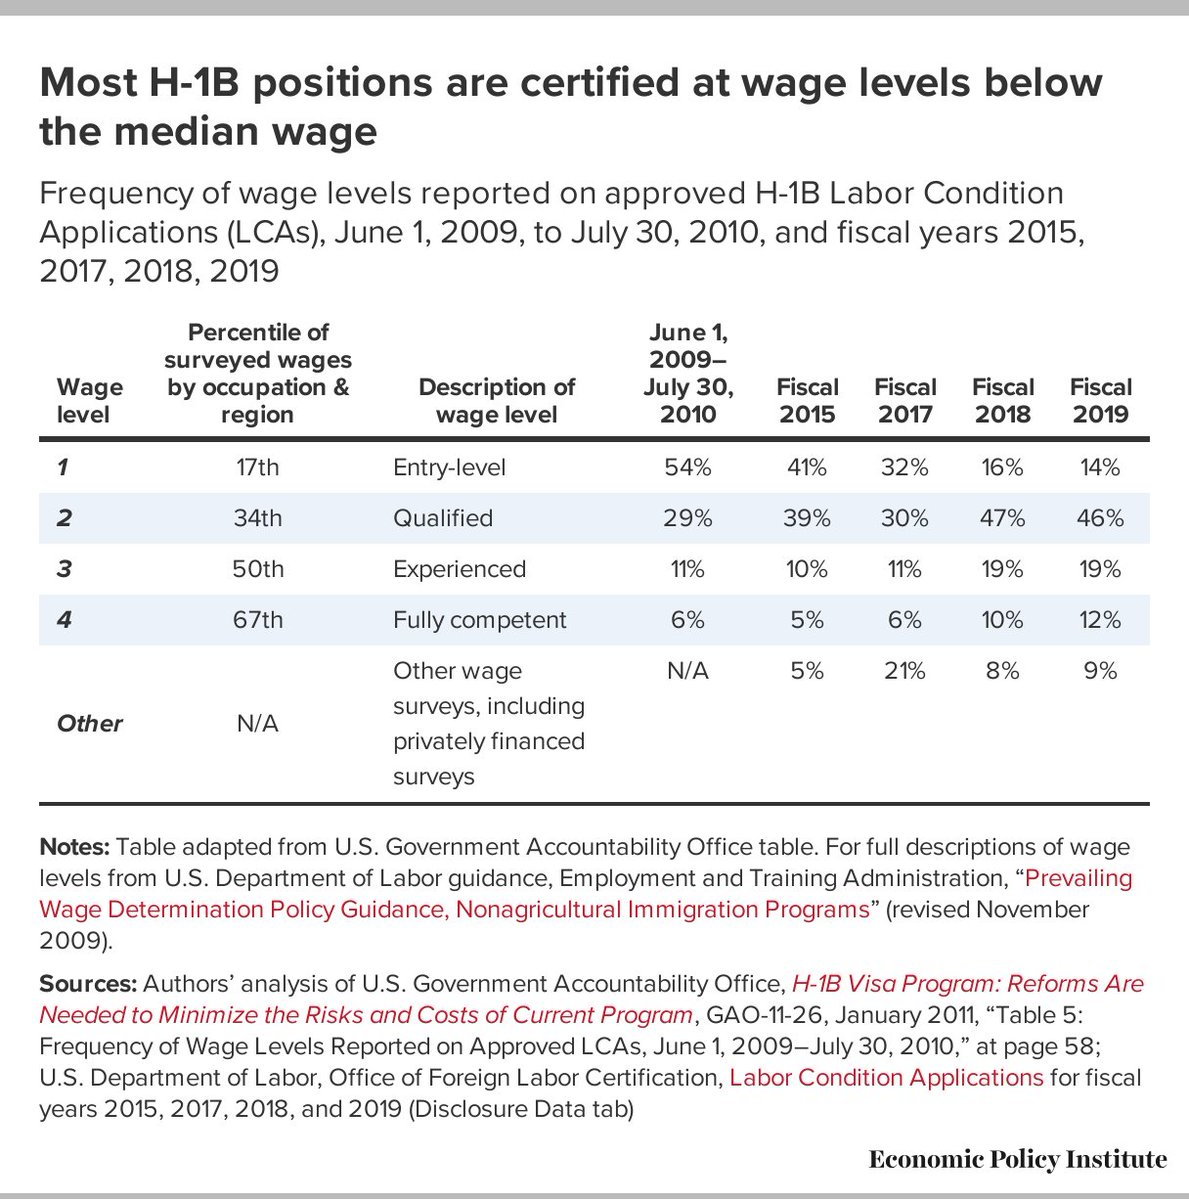 @SVCChamber @ActSecJulieSu @SecRaimondo @WhiteHouse @Wipro 4. Have to admit there is 1 area where #H1B 'shines' - being #CheapLabor!
Majority #H1BVisa LCA wage levels below median wage (50th percentile, 'Experienced') - 'Fully competent' H-1B practically non-existent.